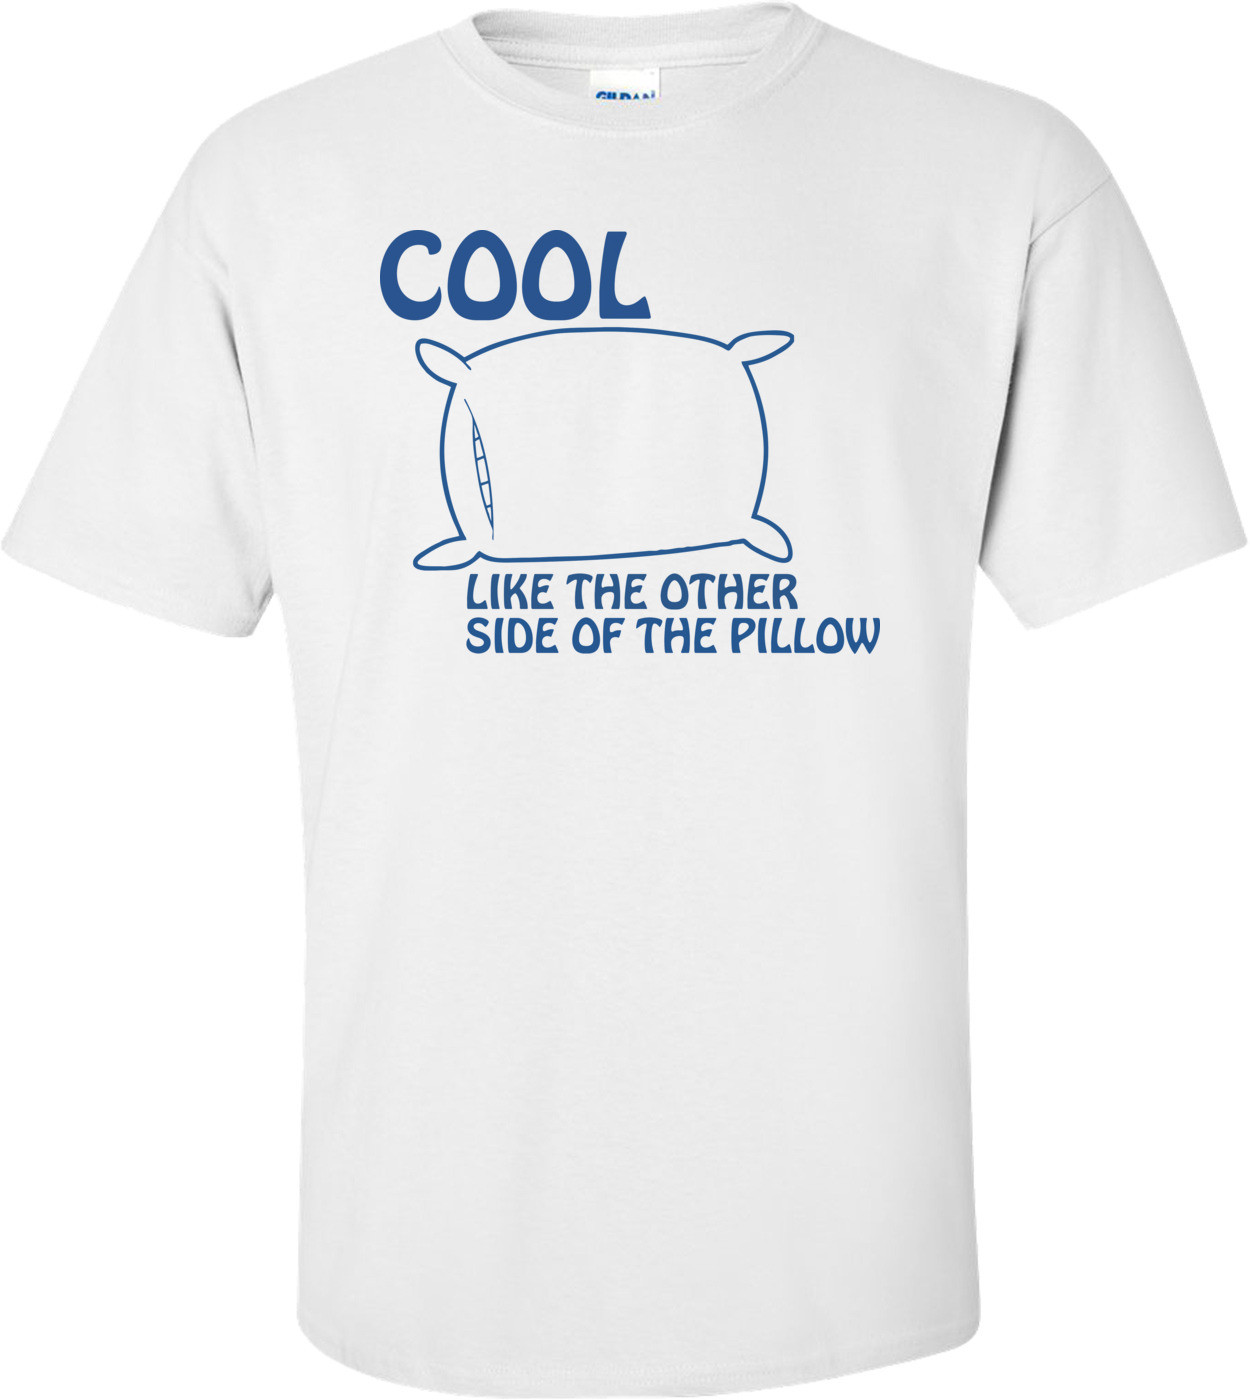 Cool, Like The Other Side Of The Pillow T-shirt